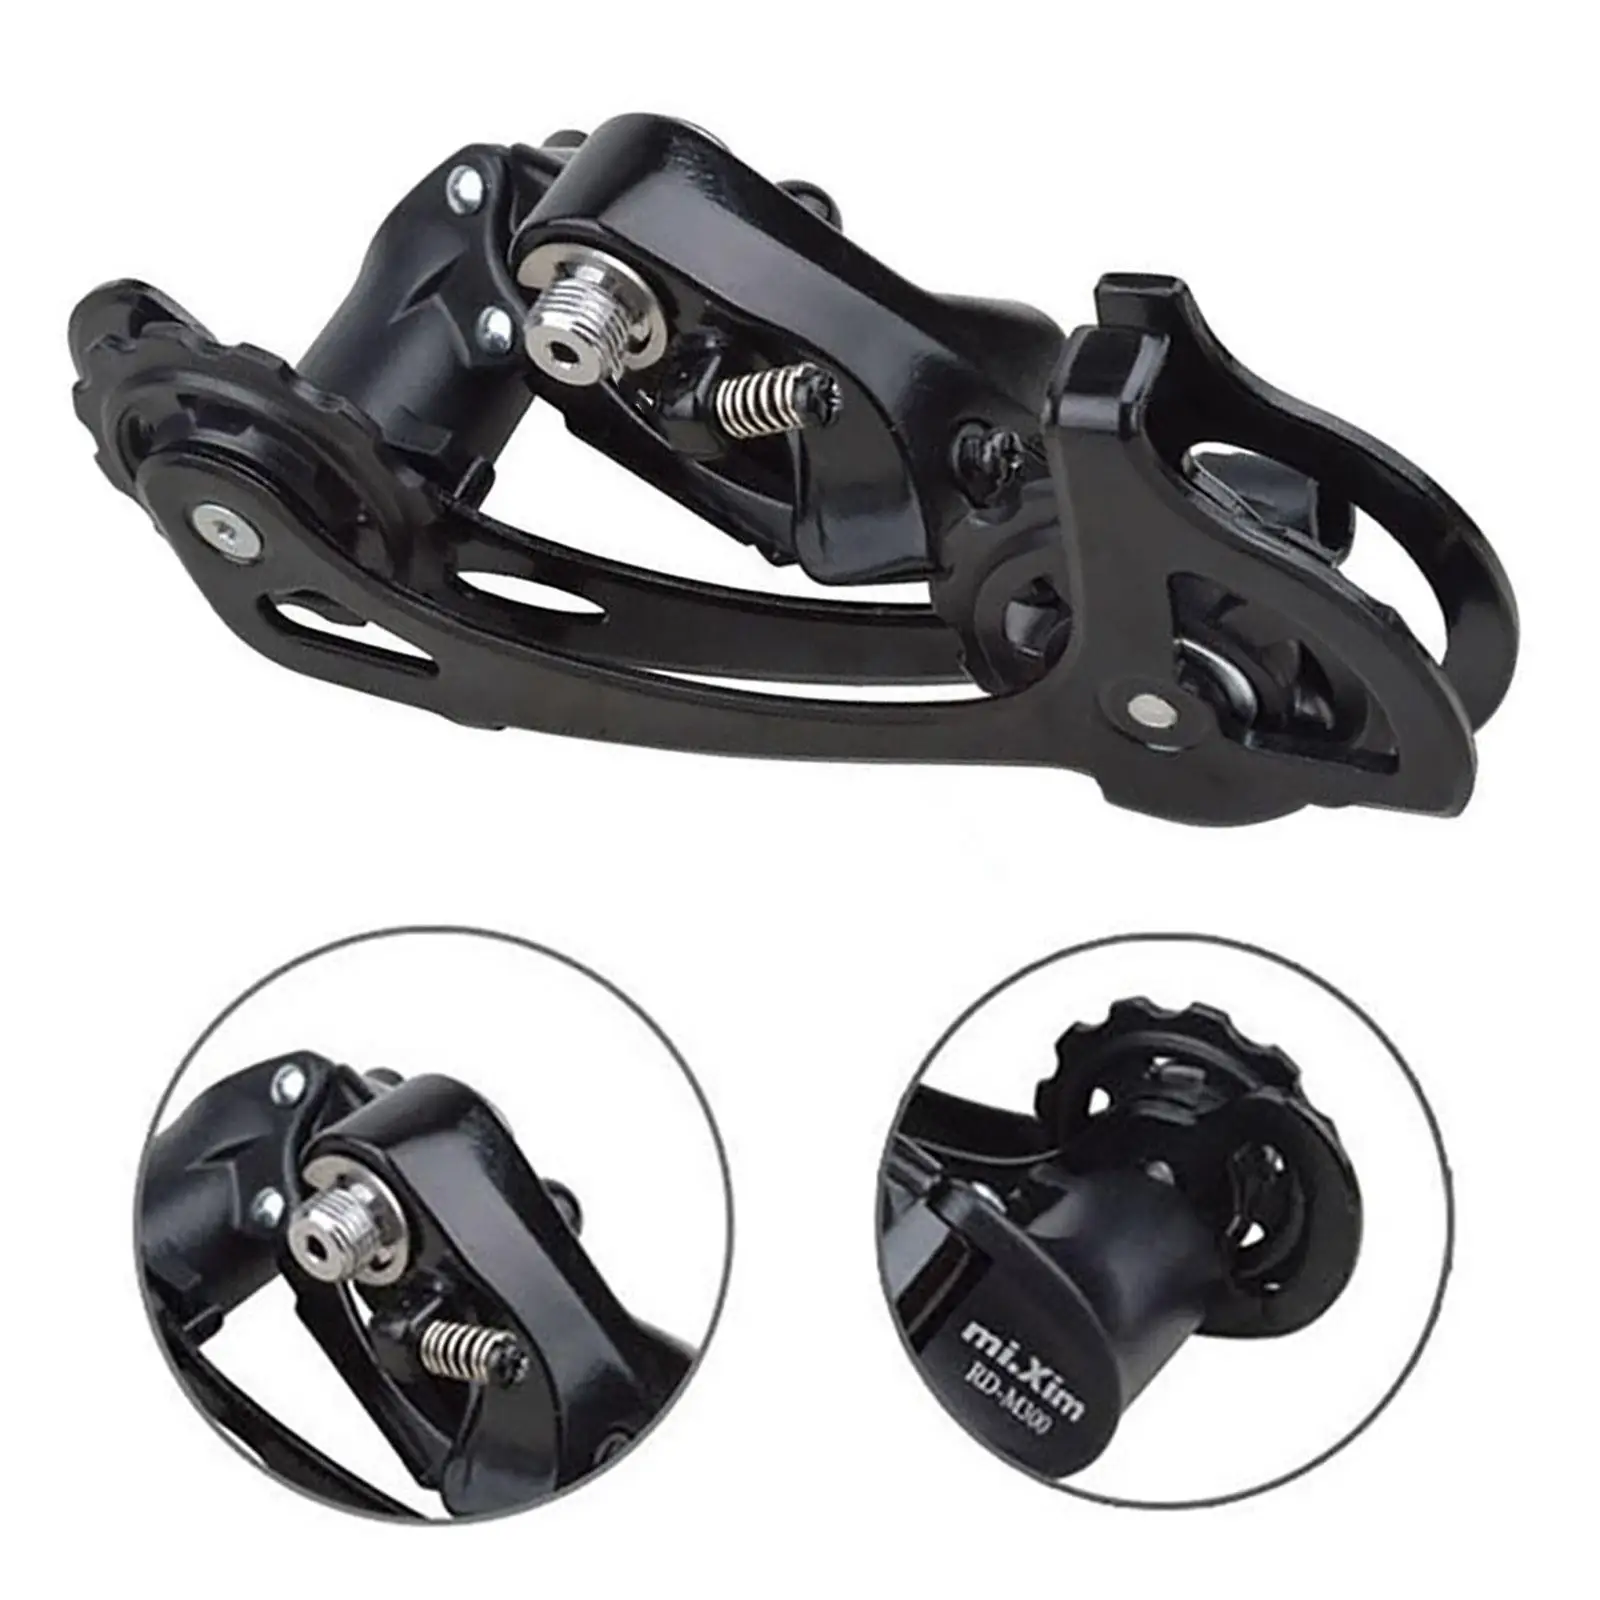 Rd Bicycle Rear Derailleur Durable Easy Installation Chain Tension Adapter Multipurpose Outdoor for Road Bikes Supplies